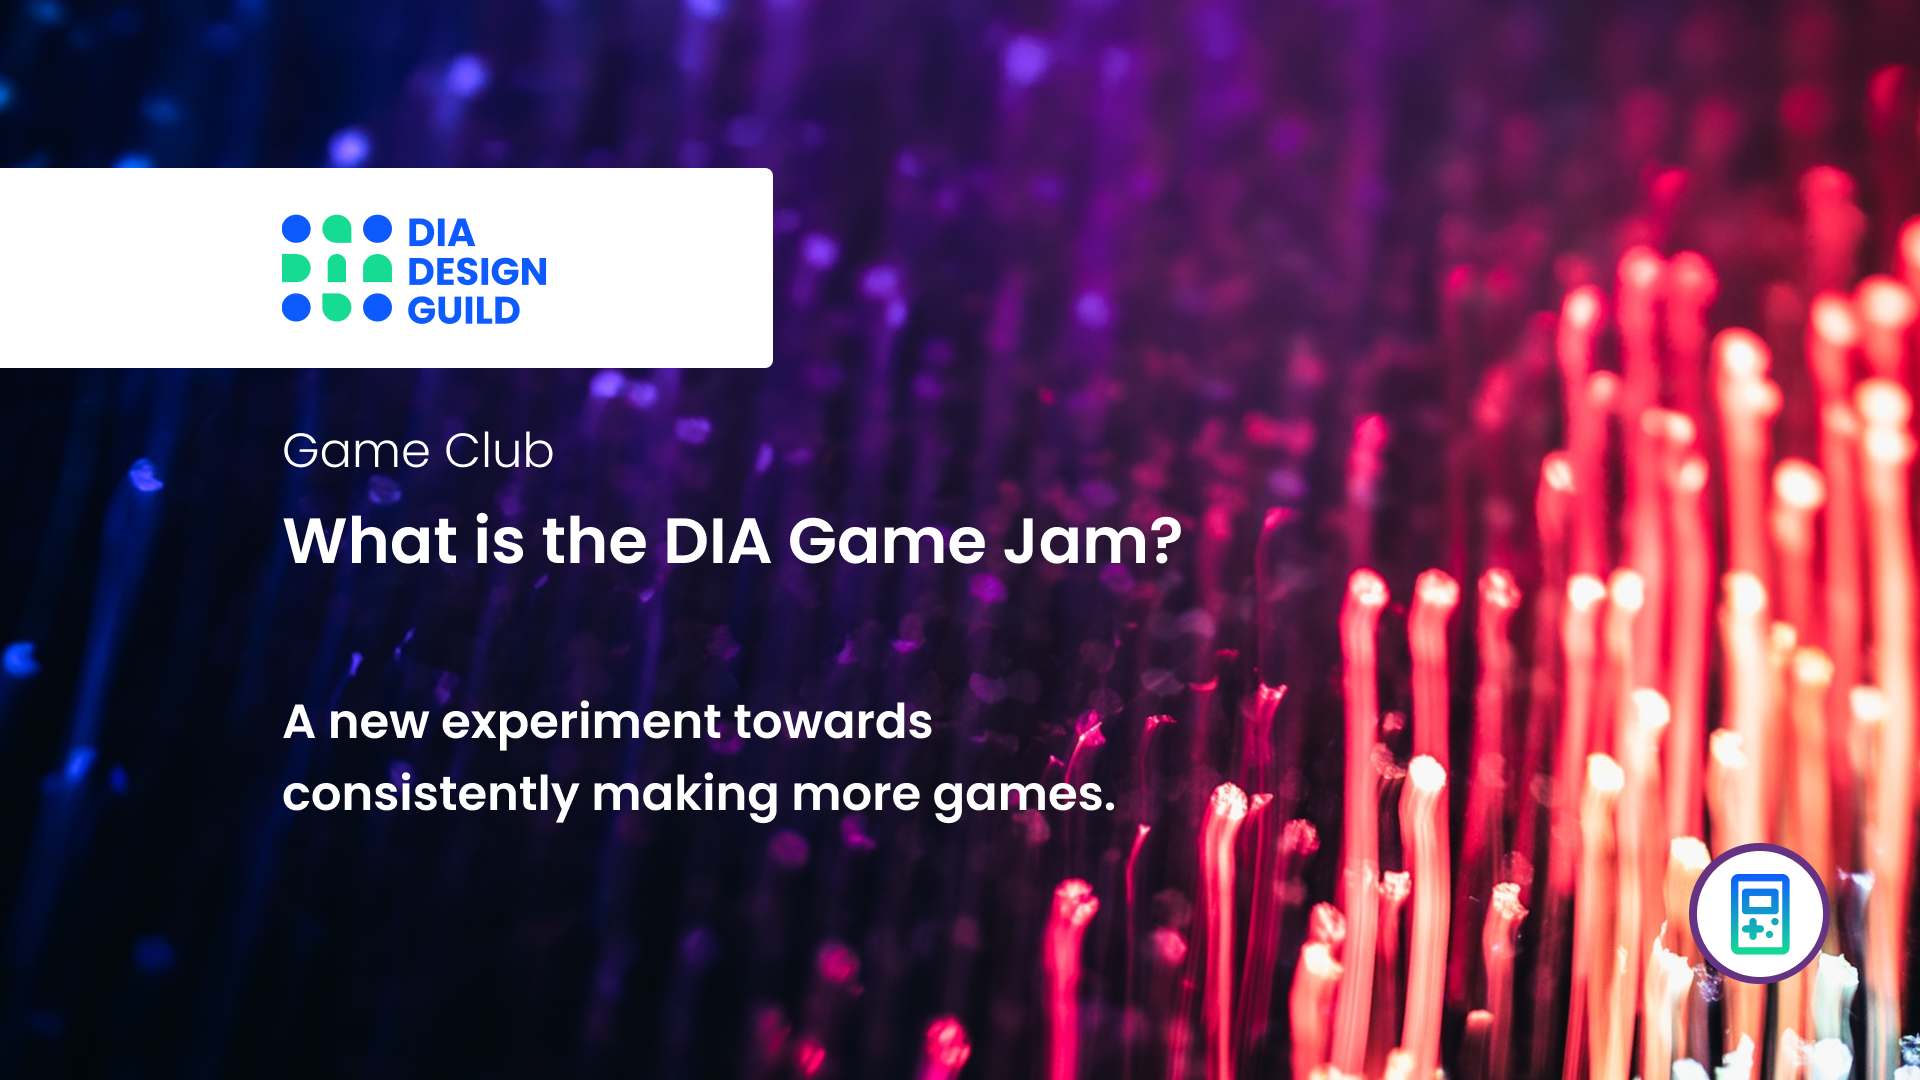 What is the DIA Game Jam?